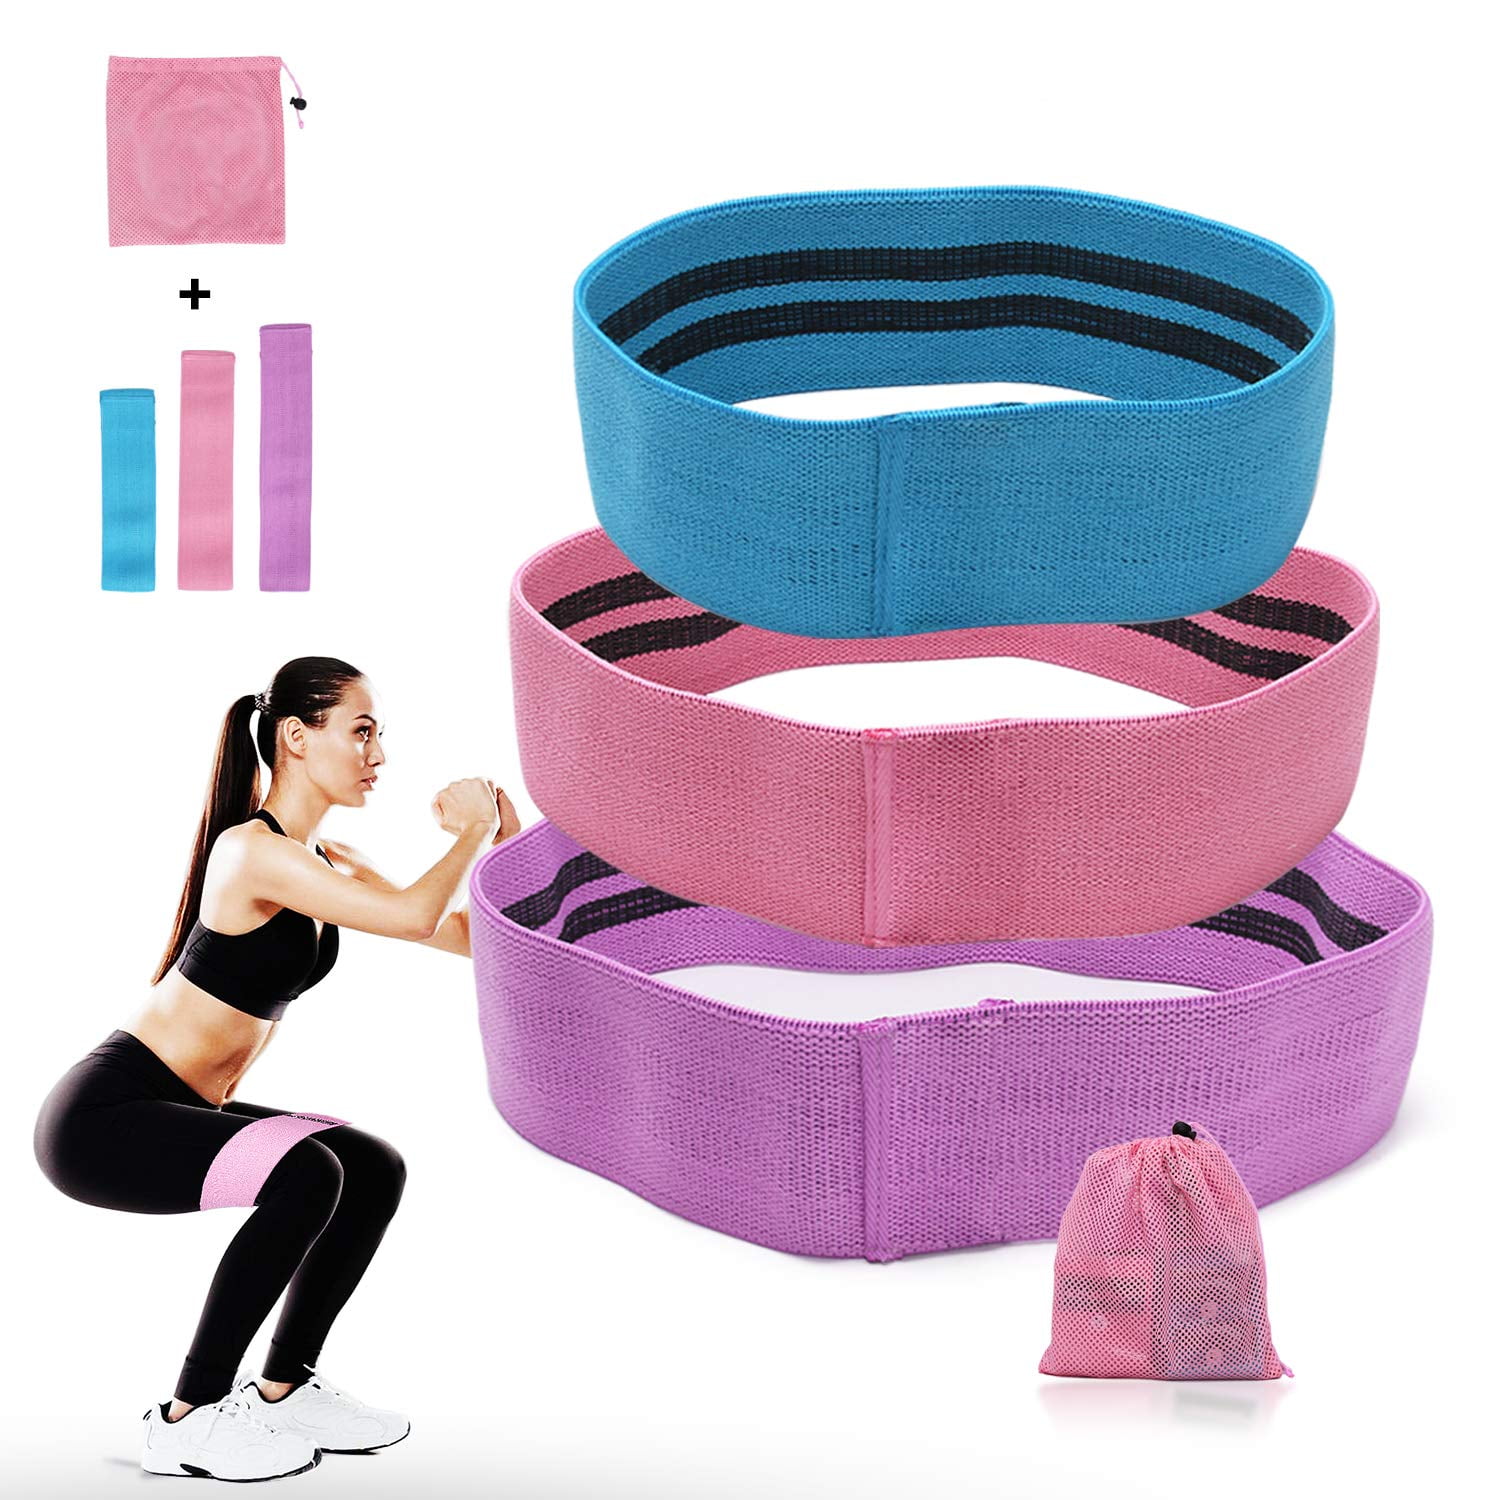 Life-time Warranty Resistance Bands for Legs and Butt Exercise Bands Booty Bands Hip Bands Wide Workout Bands Sports-Fitness Bands Stretch Resistance Loops Band Anti Slip Elastic 